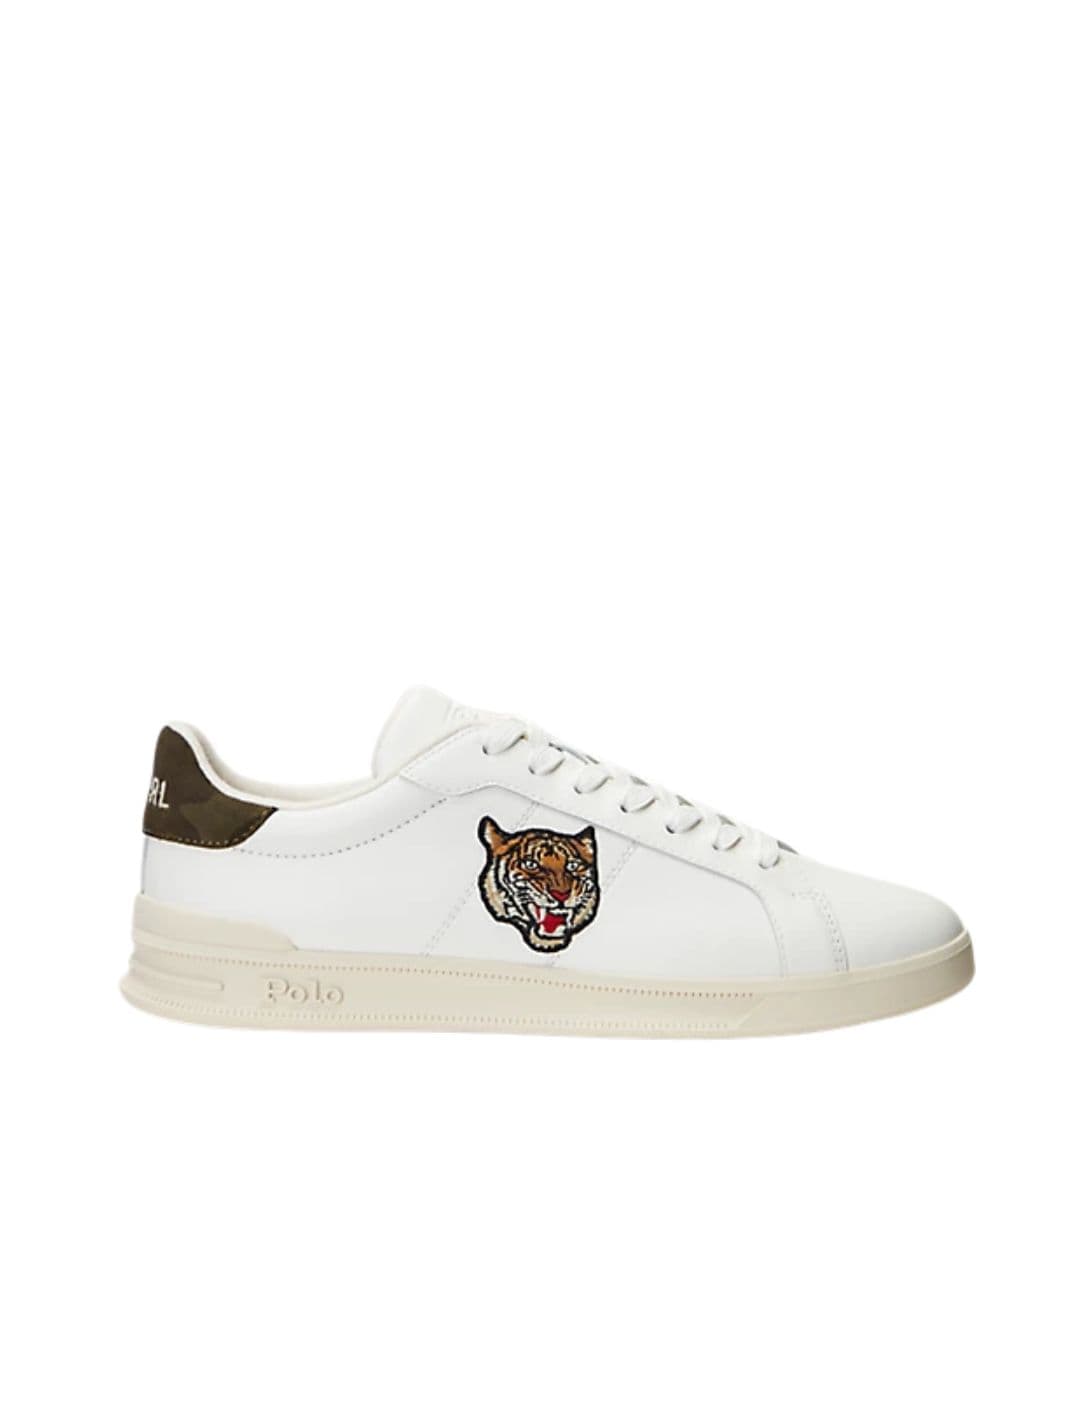 Polo Ralph Lauren Shoes Sneakers | Tiger Court White